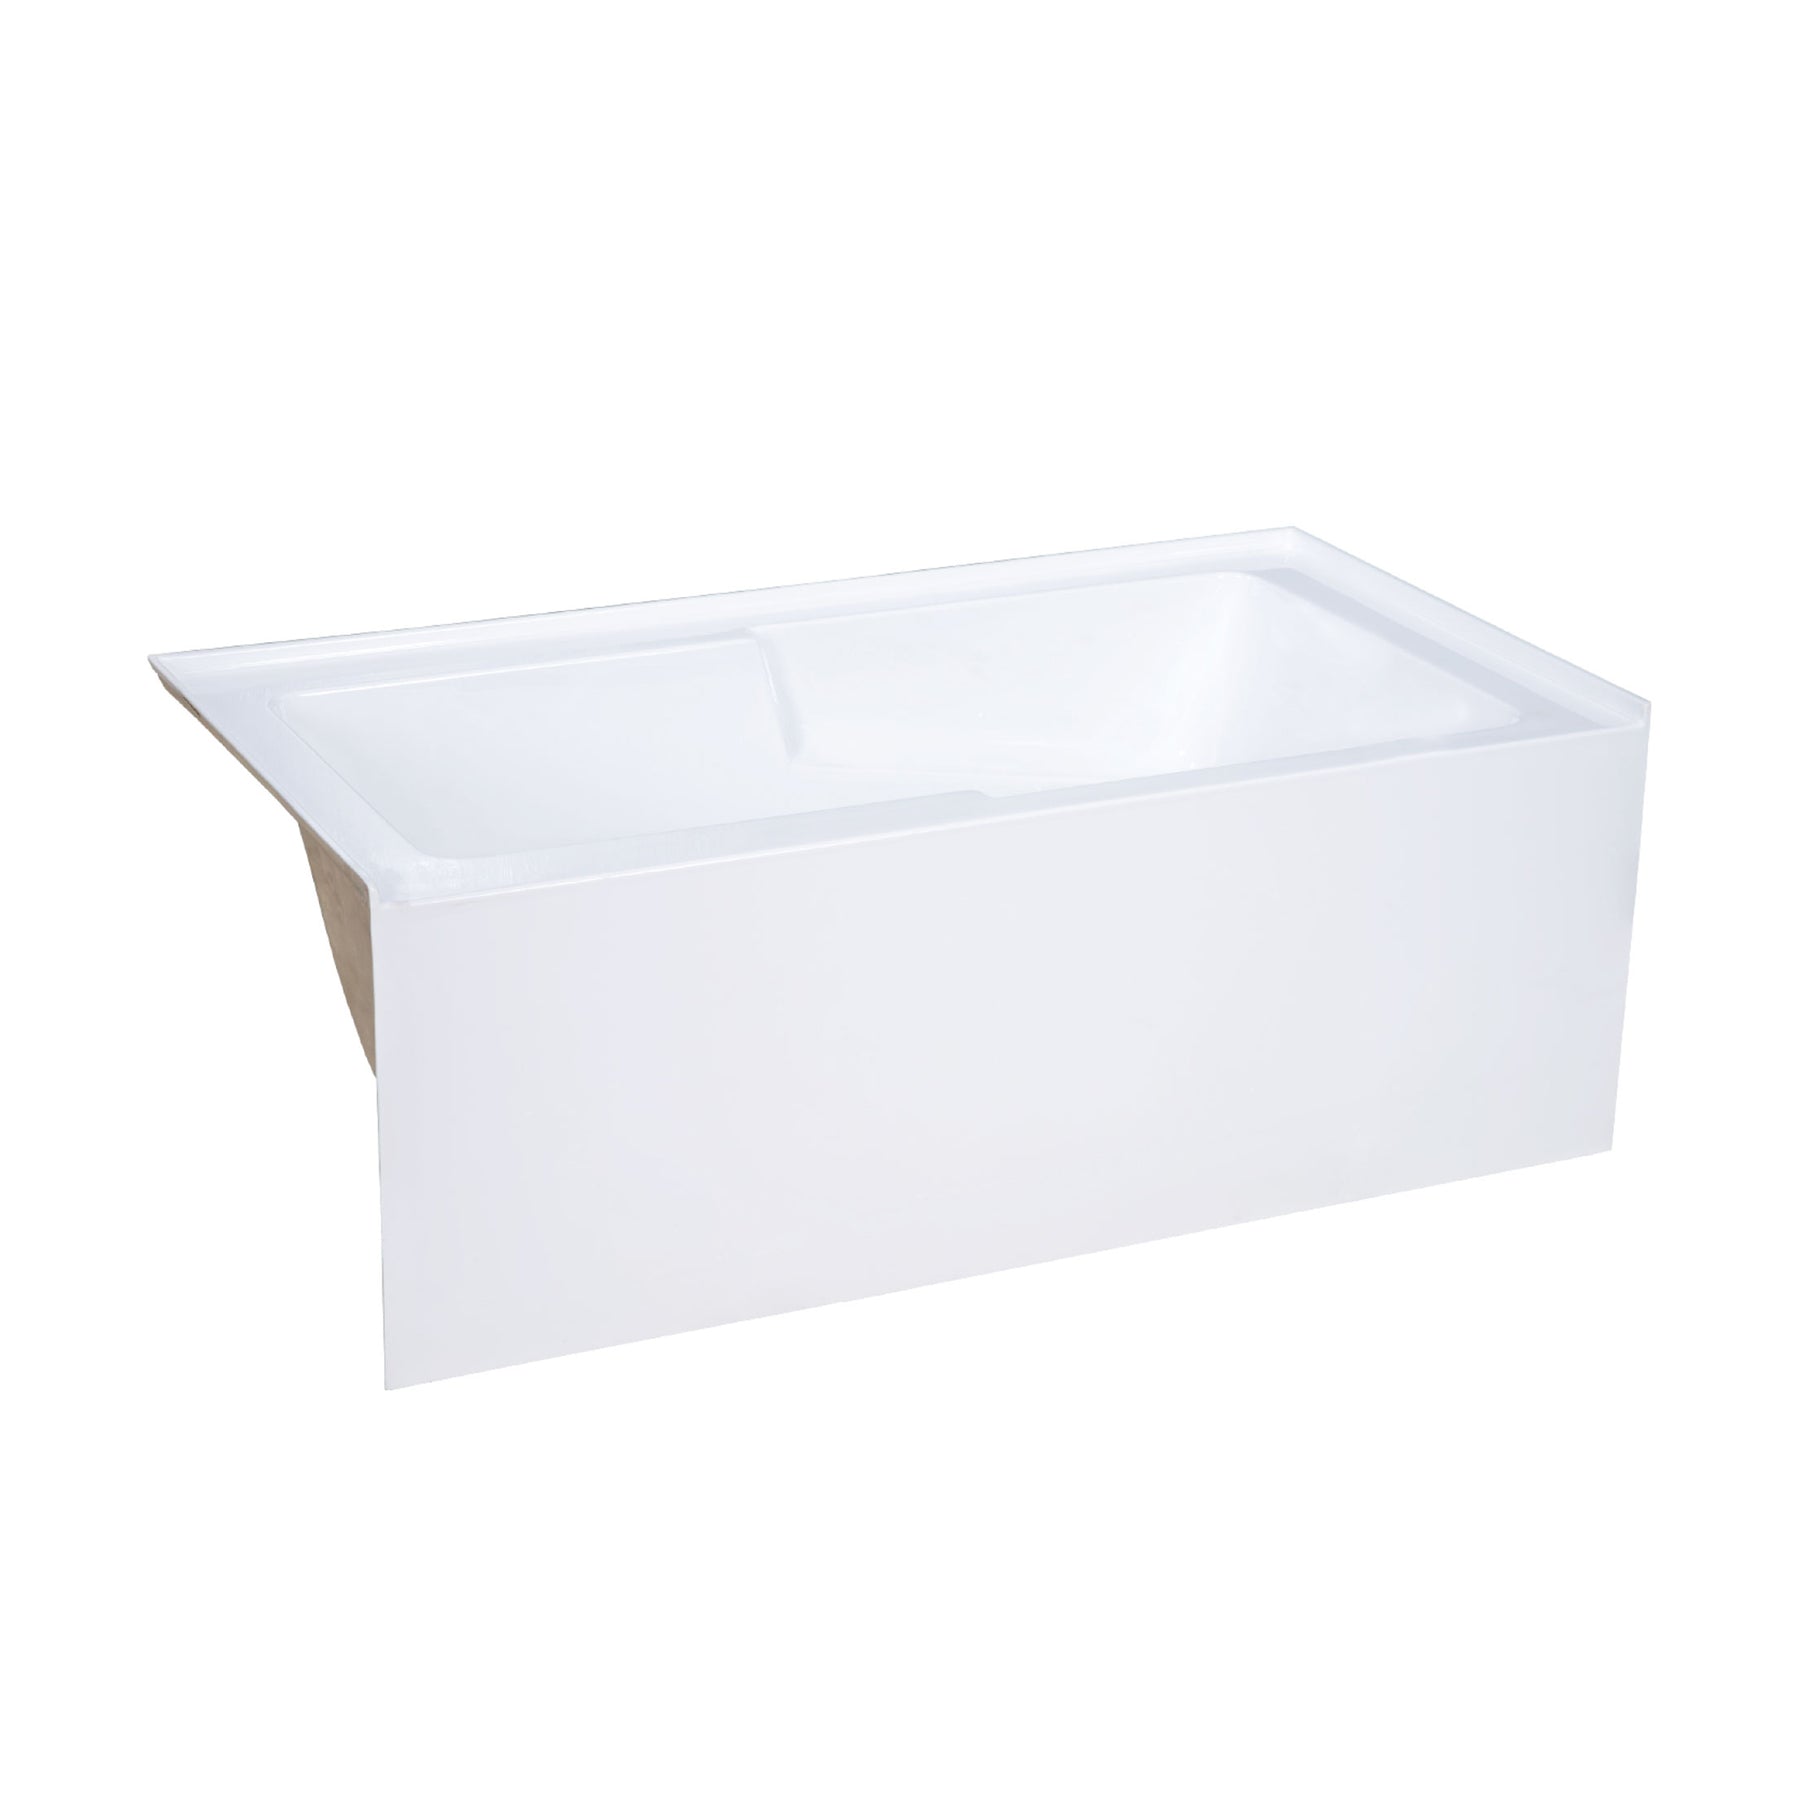 Swiss Madison Voltaire 60" X 32" Right-Hand Drain Alcove Bathtub with Apron - SM-AB542